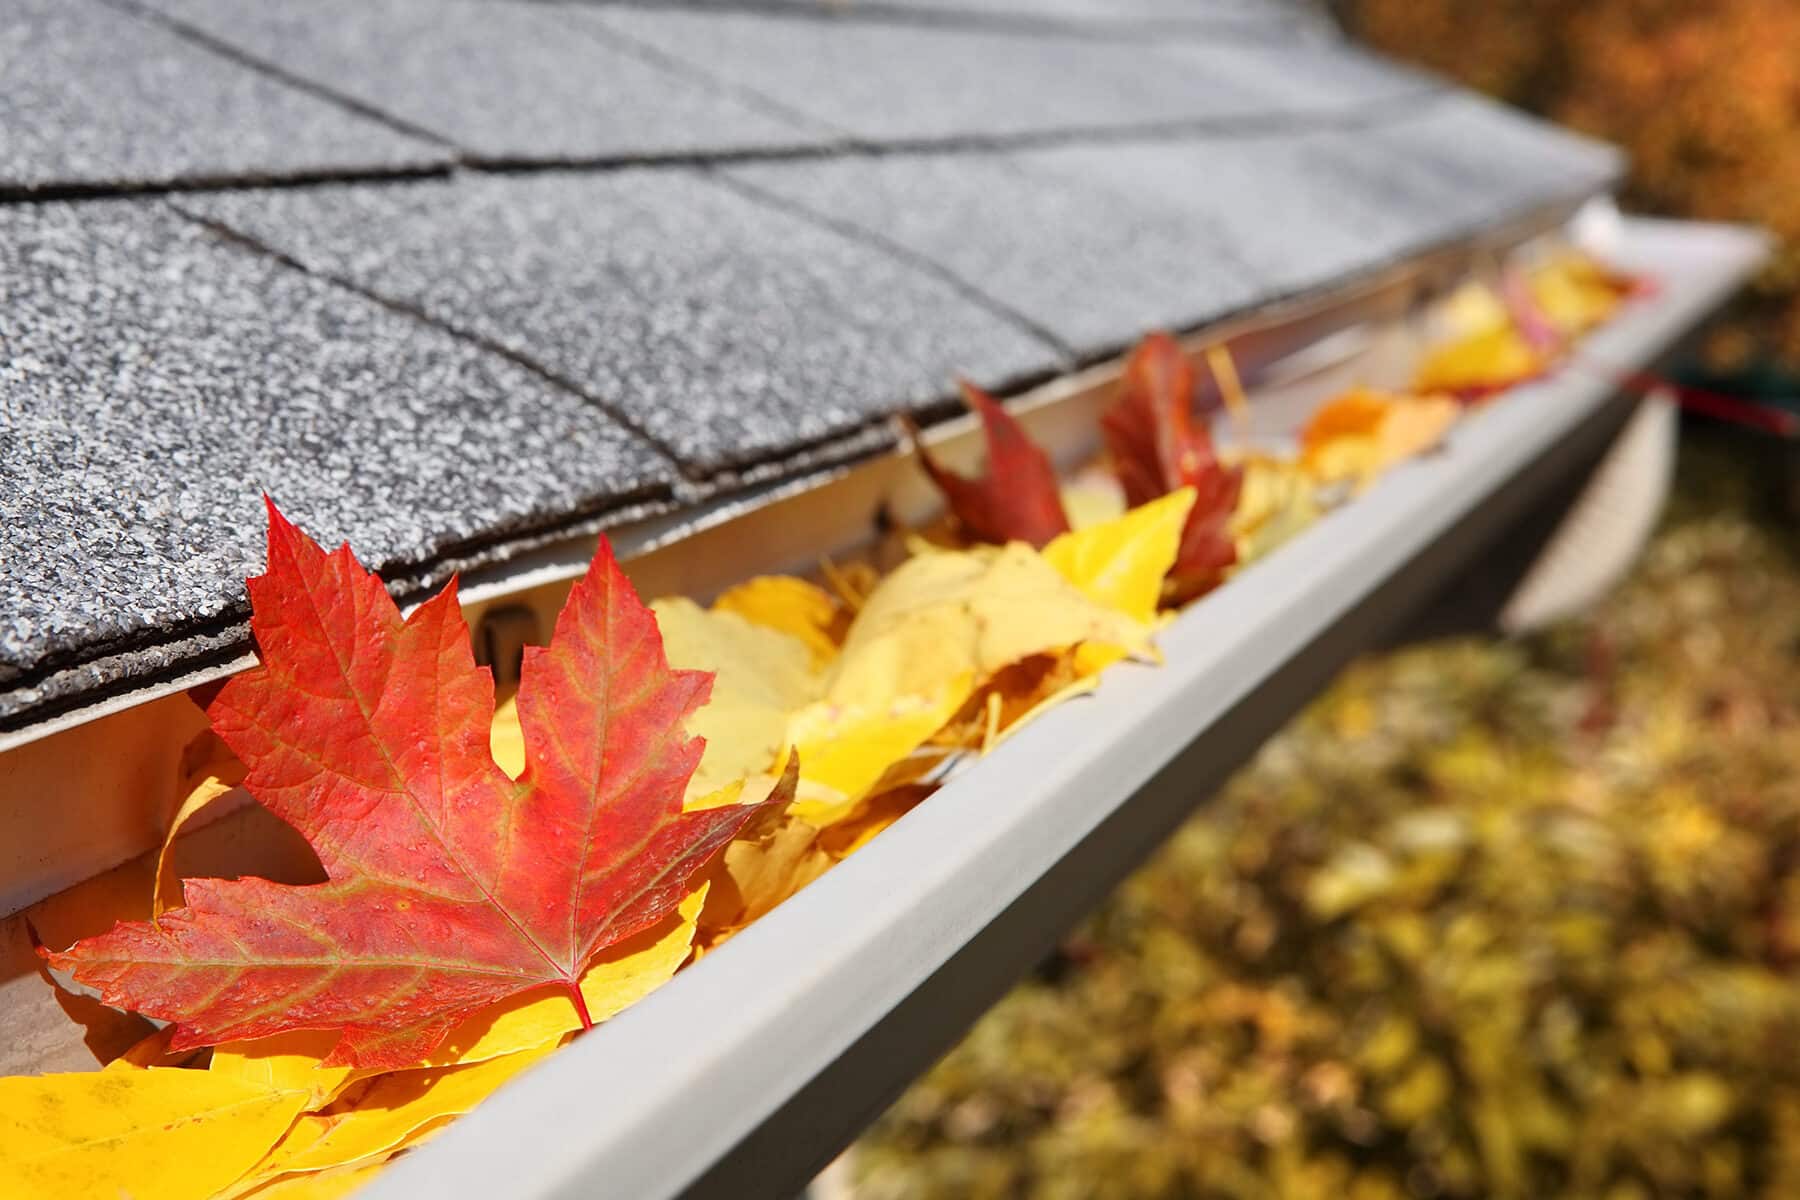 Gutter Cleaning in Ottawa: A Necessary Tasks for Every Homeowner